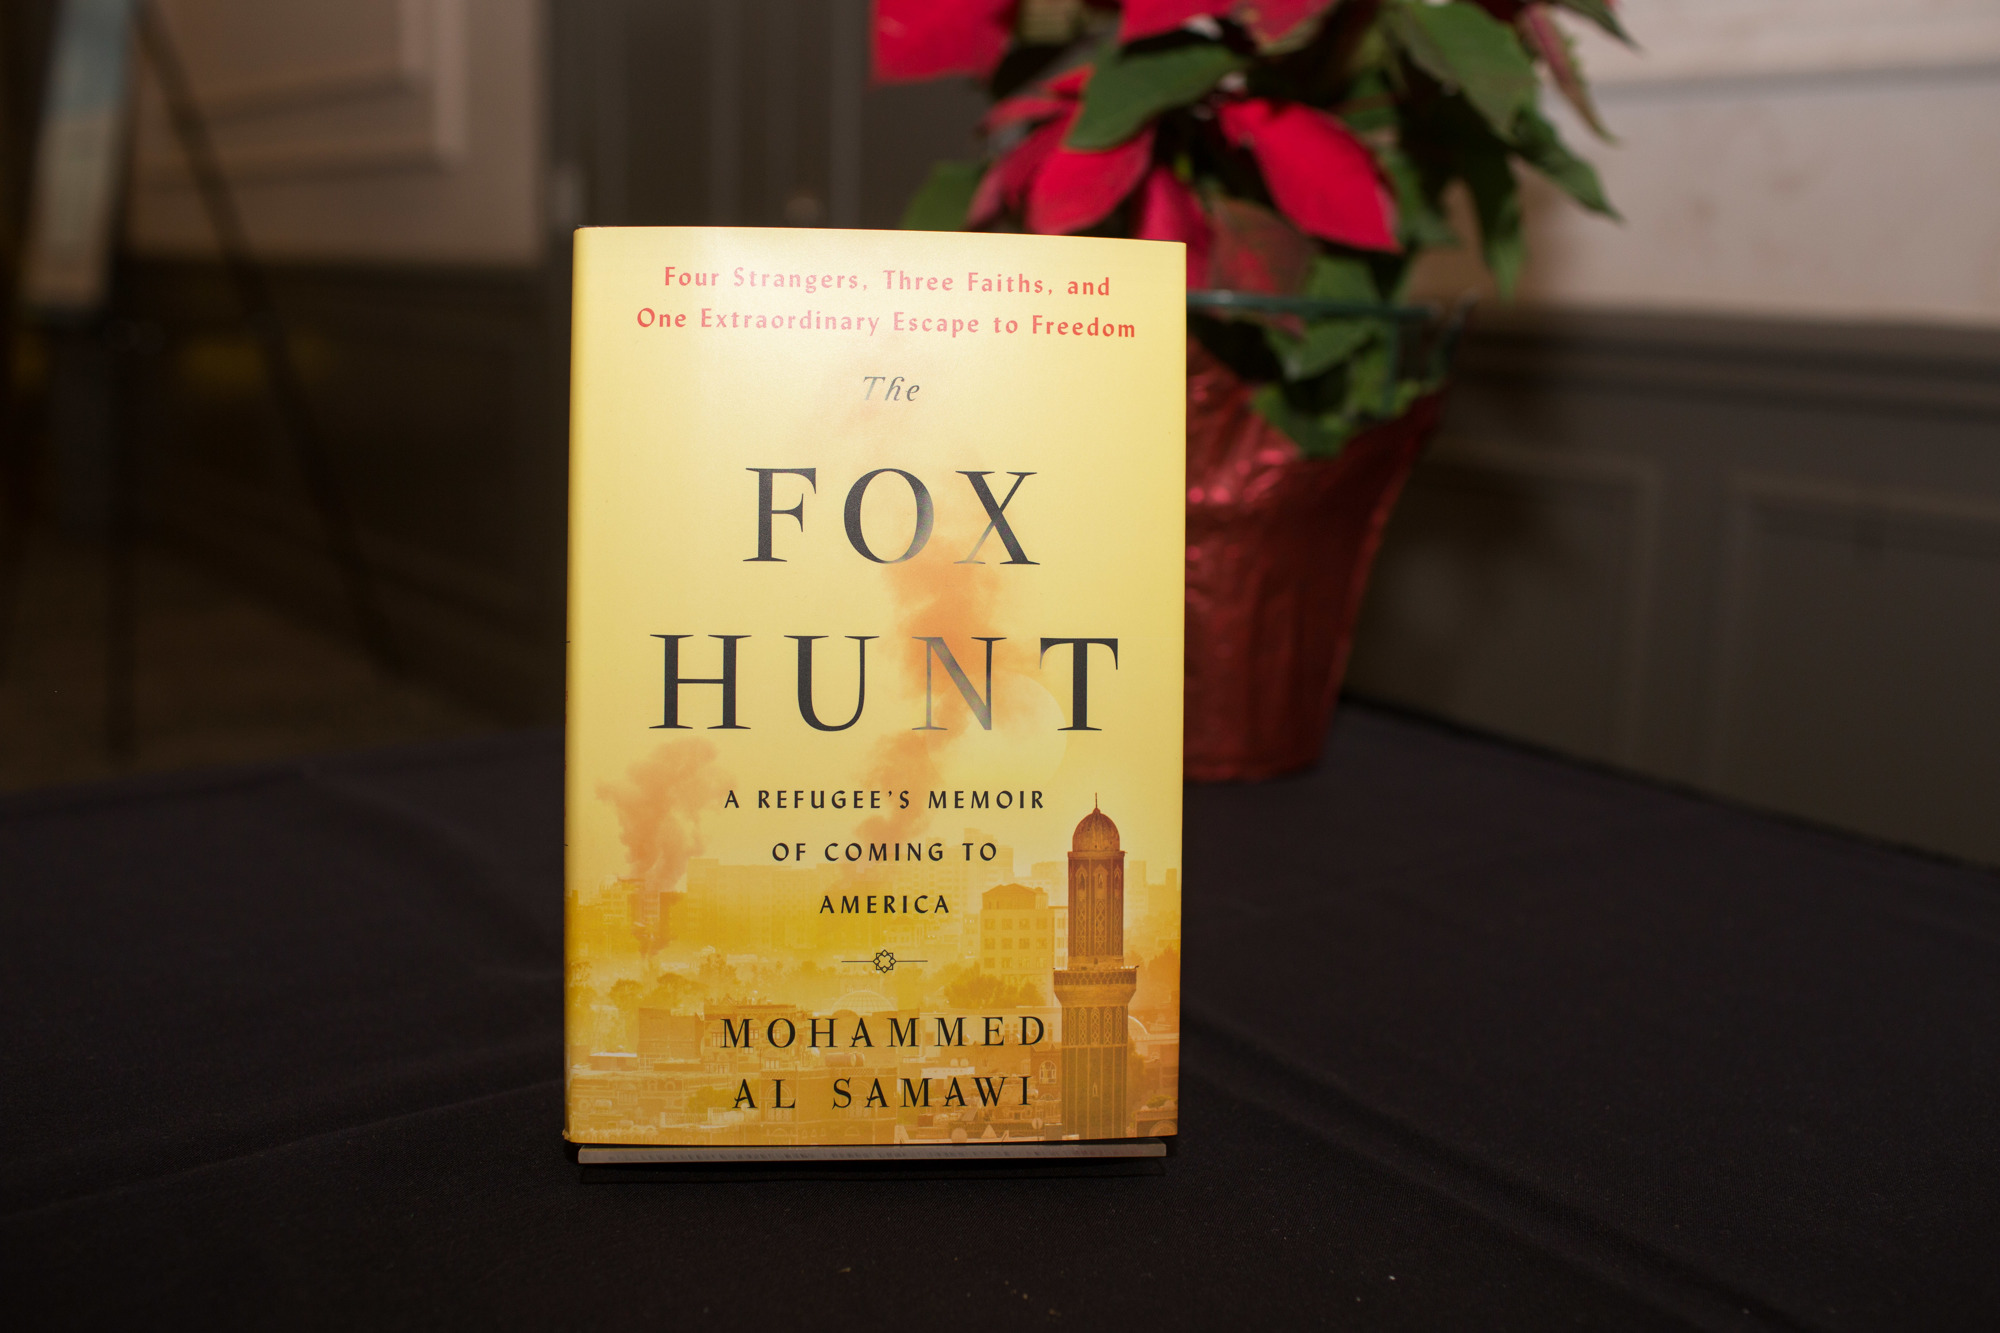 The Fox Hunt by Mohammed Al Samawi